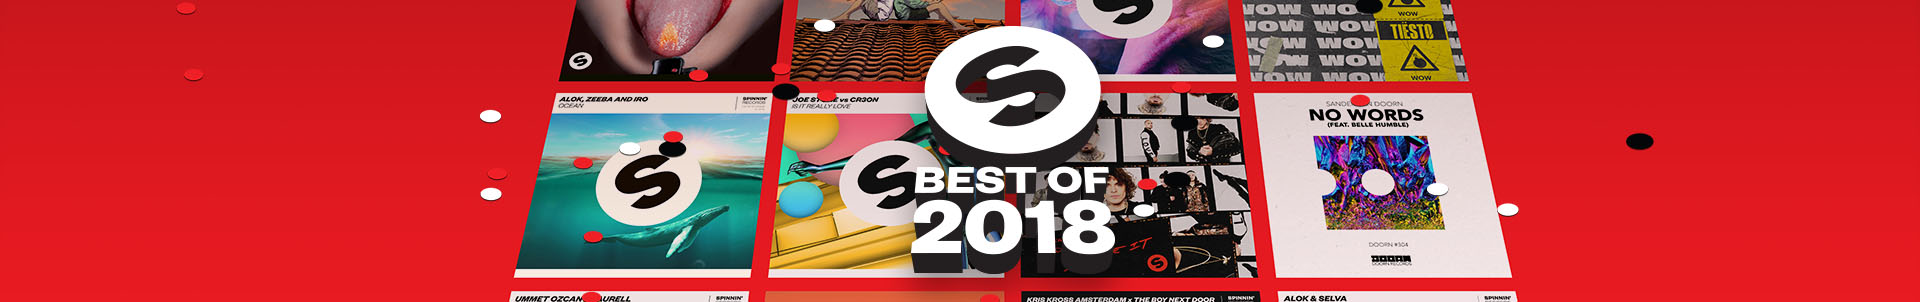 Create your personalised Spinnin' Records 'Best of 2018' playlist with all your favorite music